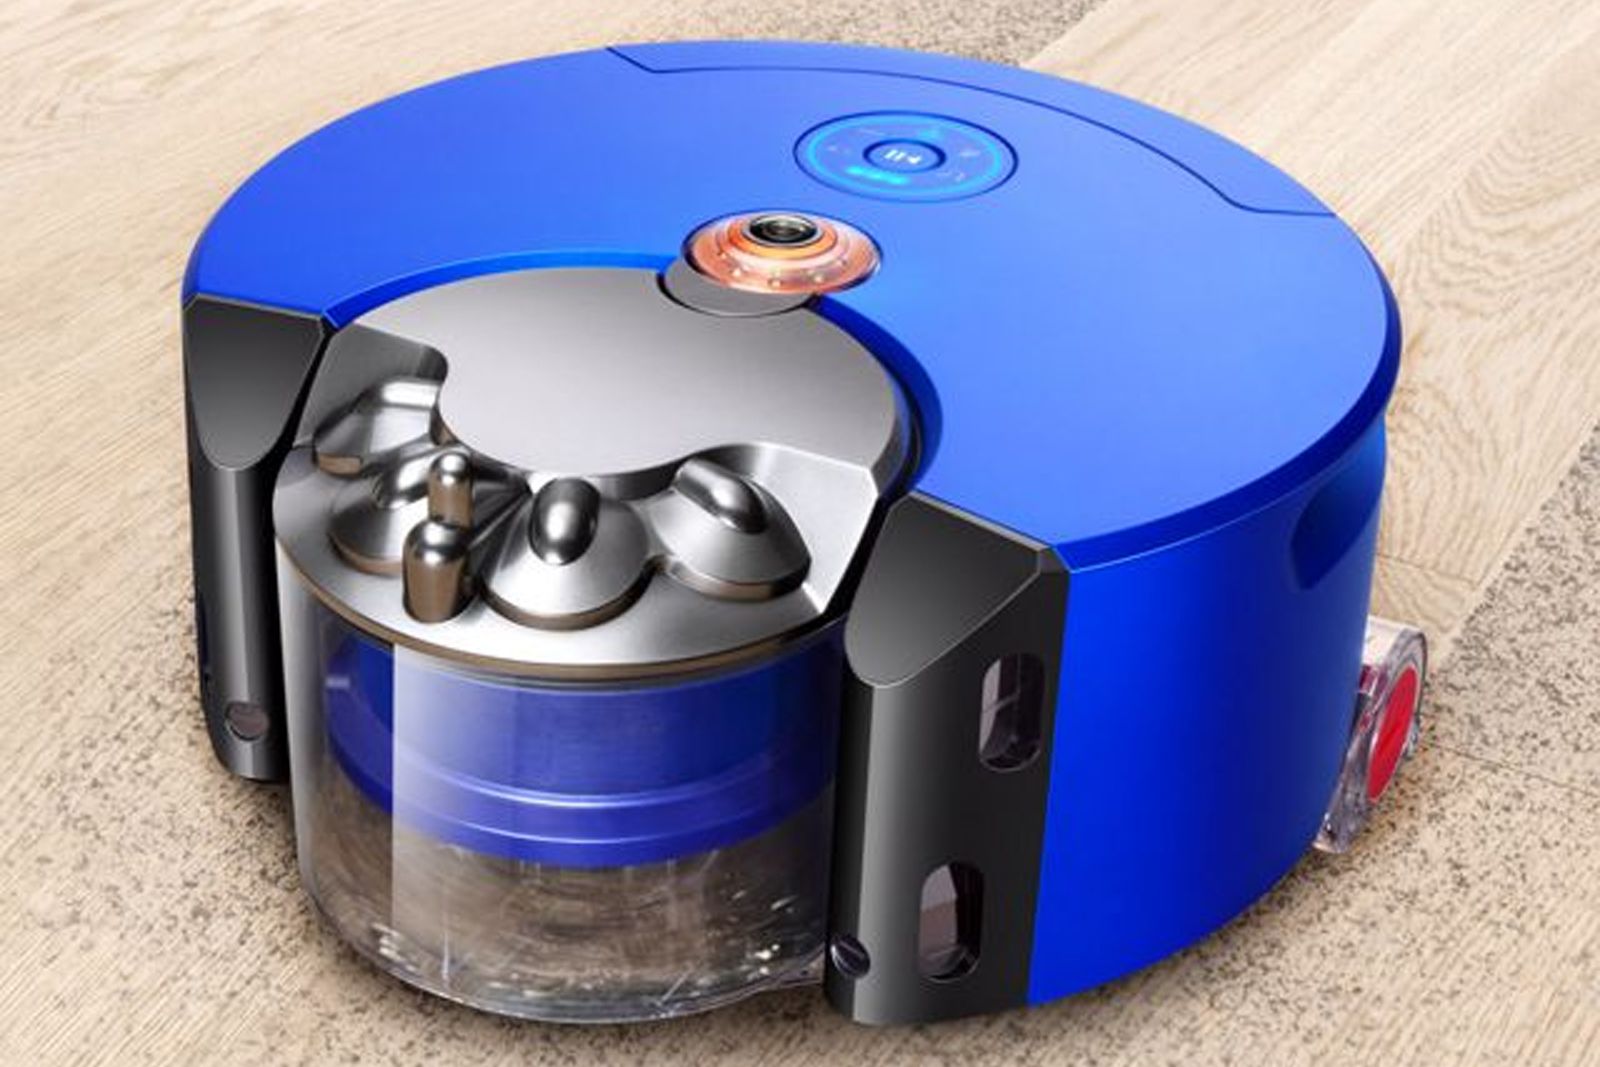 Dyson 360 Heurist robot vacuum: Everything you need to know